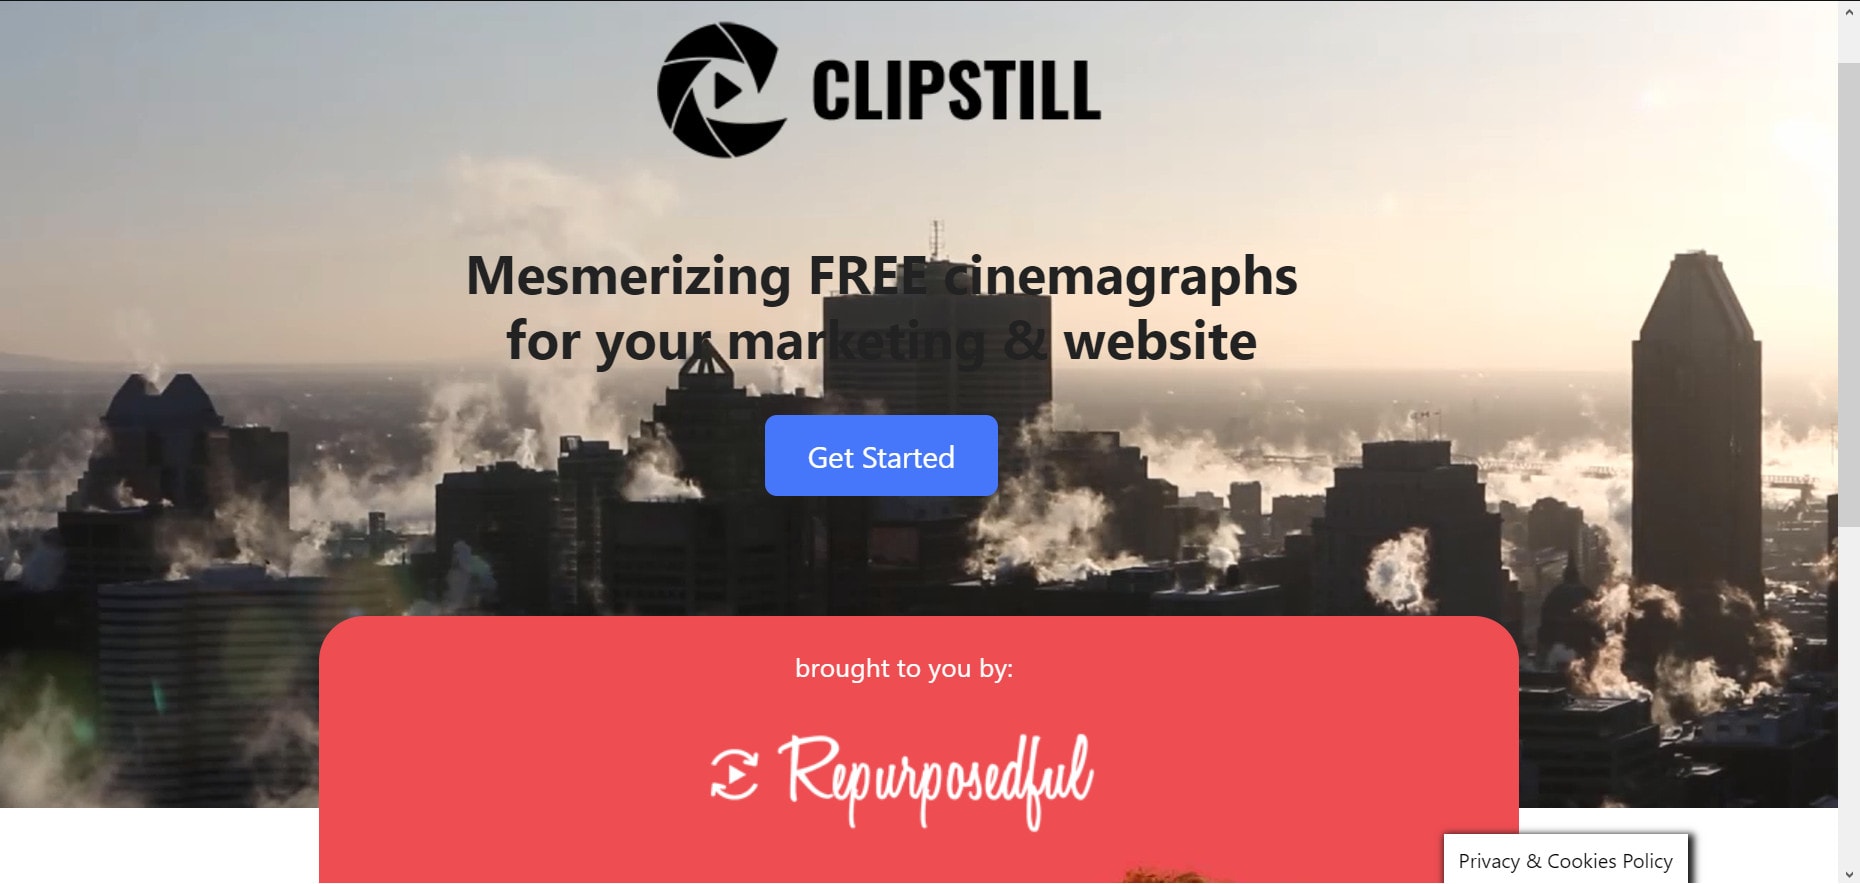 clipstill official page